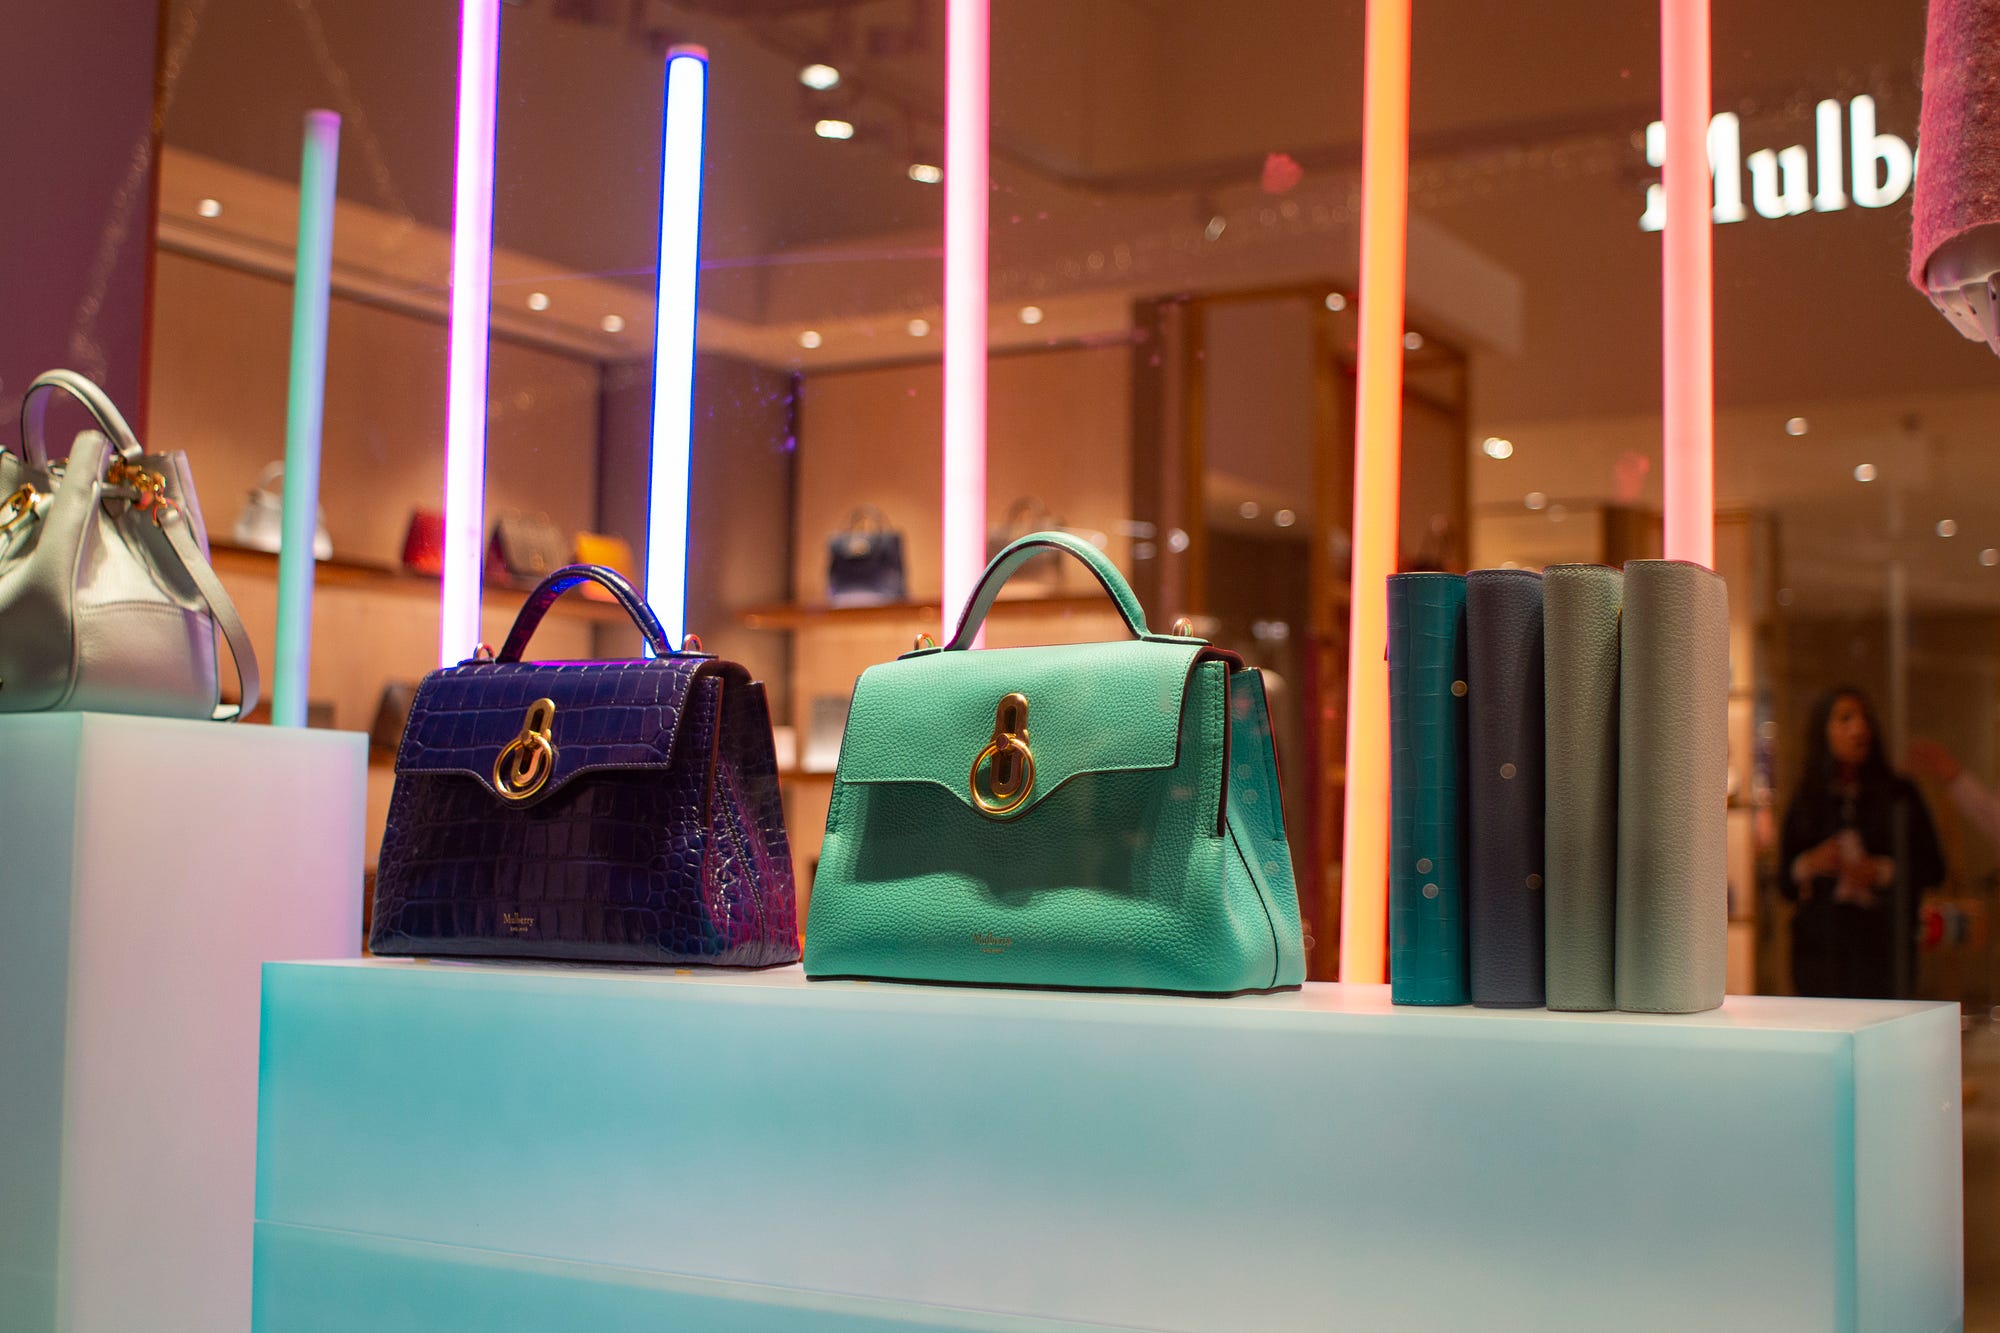 I Spent $4,000 on Two Purses. And it taught me something